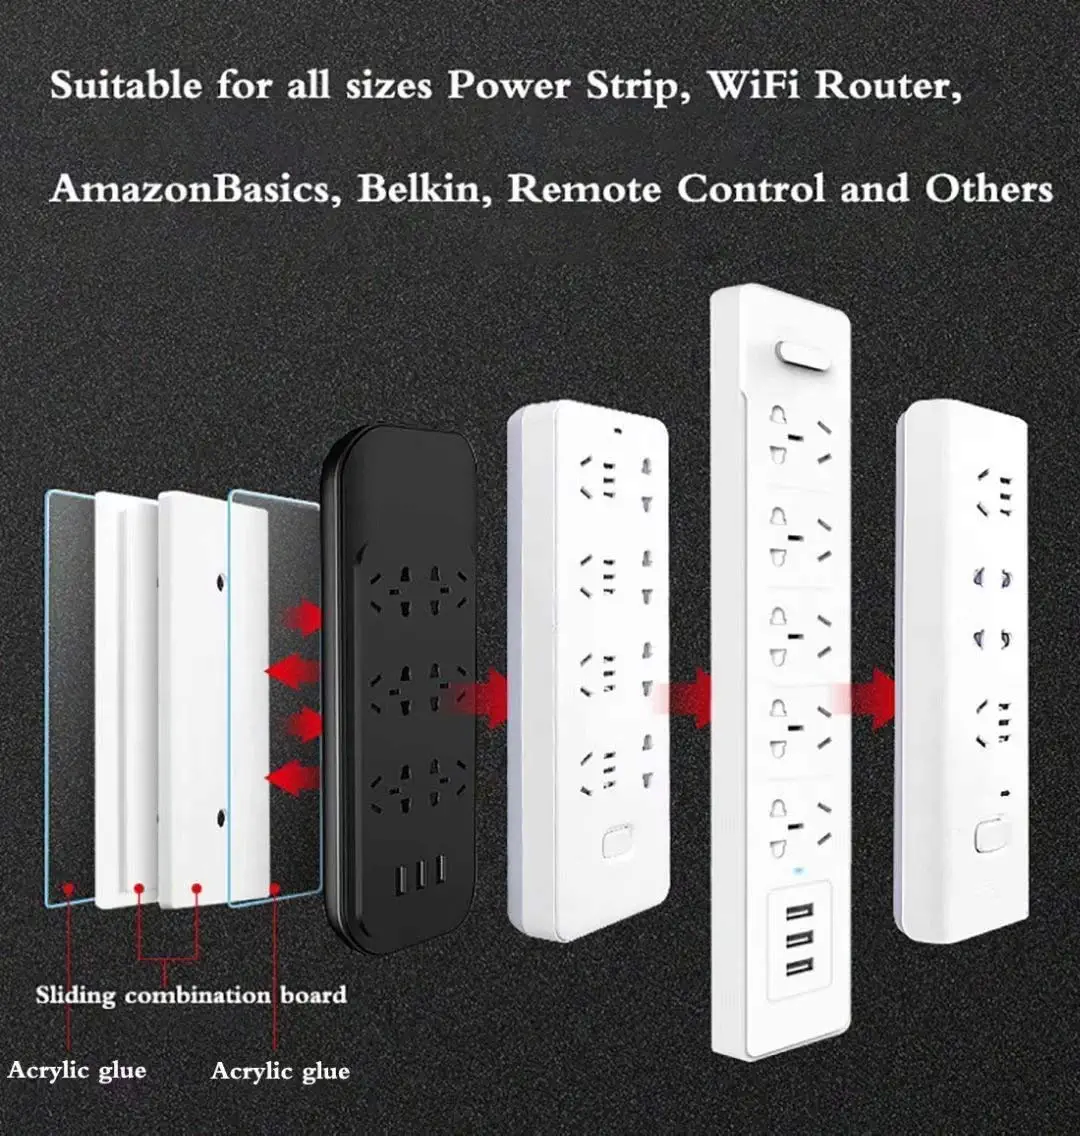 Powerboards-Self-Adhesive-Power-Strip-Holder-Power-Strip-Fixator-Wall-Mount-No-Punch-Socket-Cable-Fixer-for-Surge-WiFi-Router-Tissue-Box-Remote-Control-Organizer-10